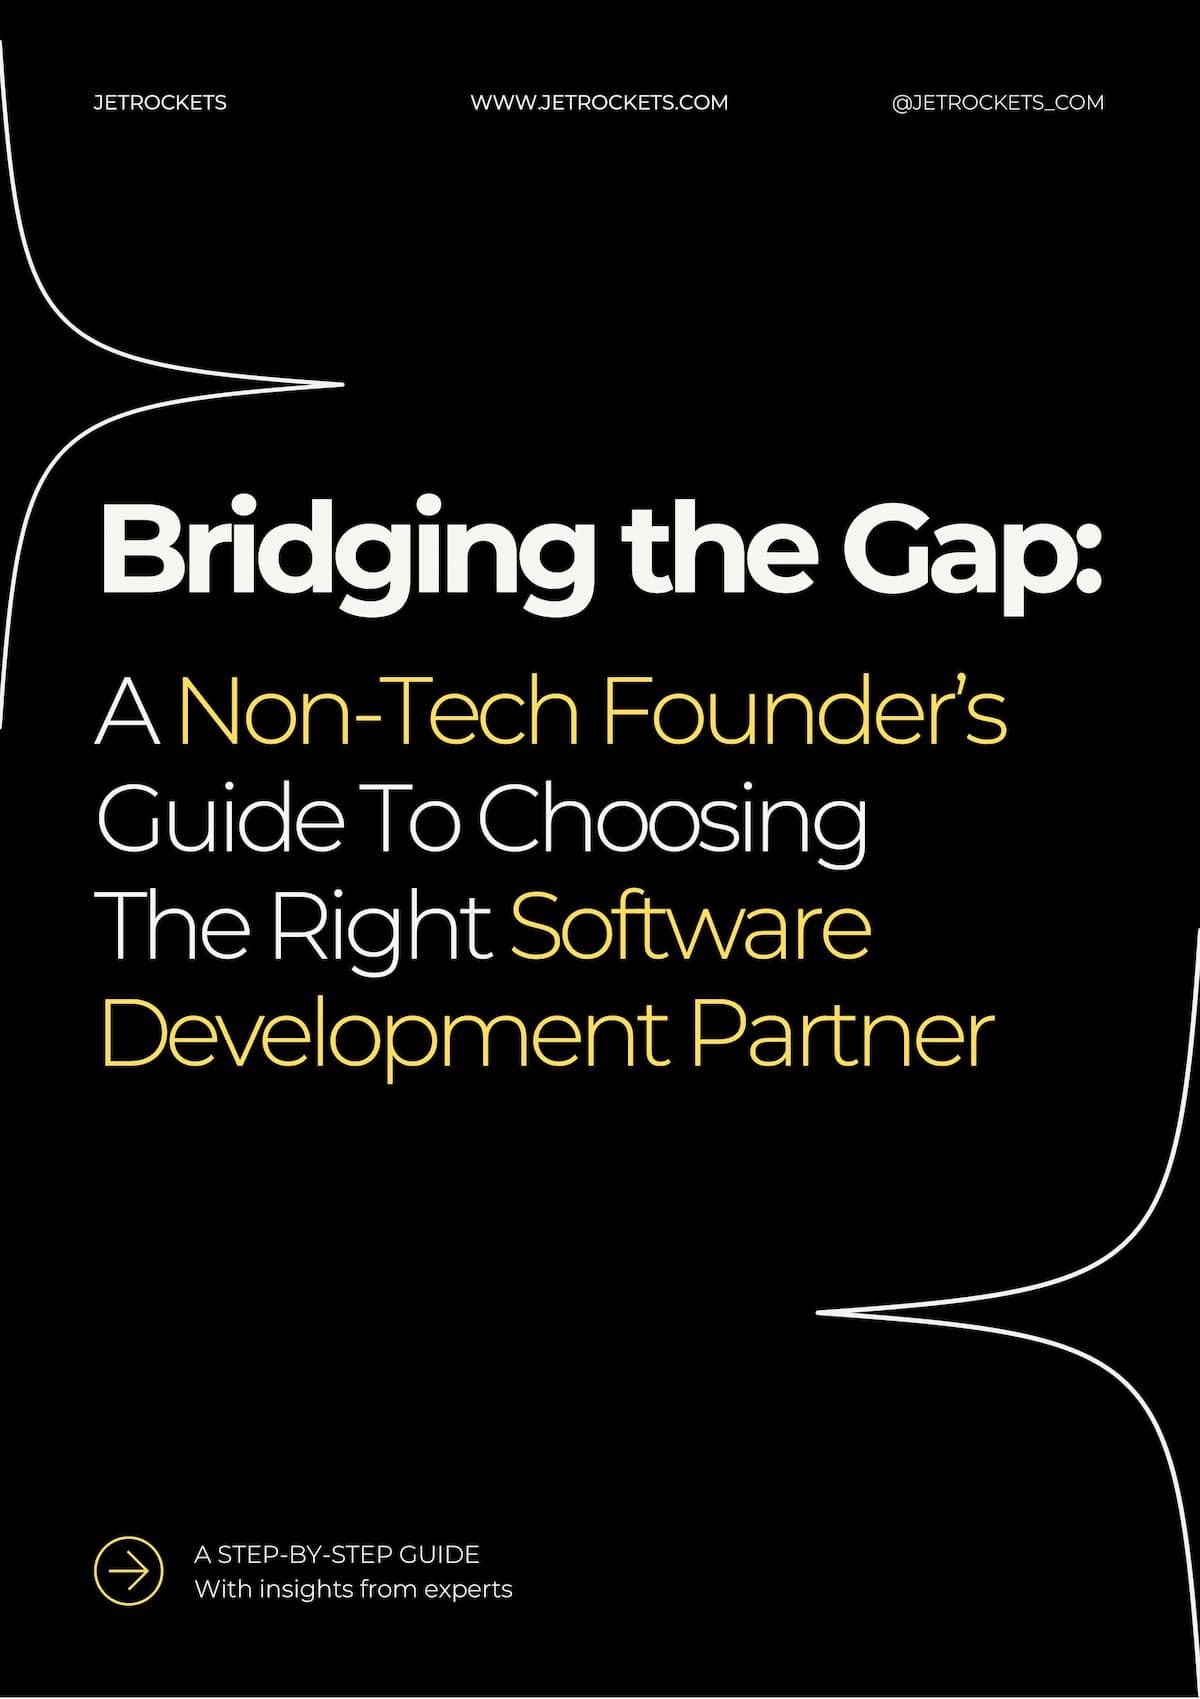 eBook "Non-tech founder’s guide to choosing the right software development partner"